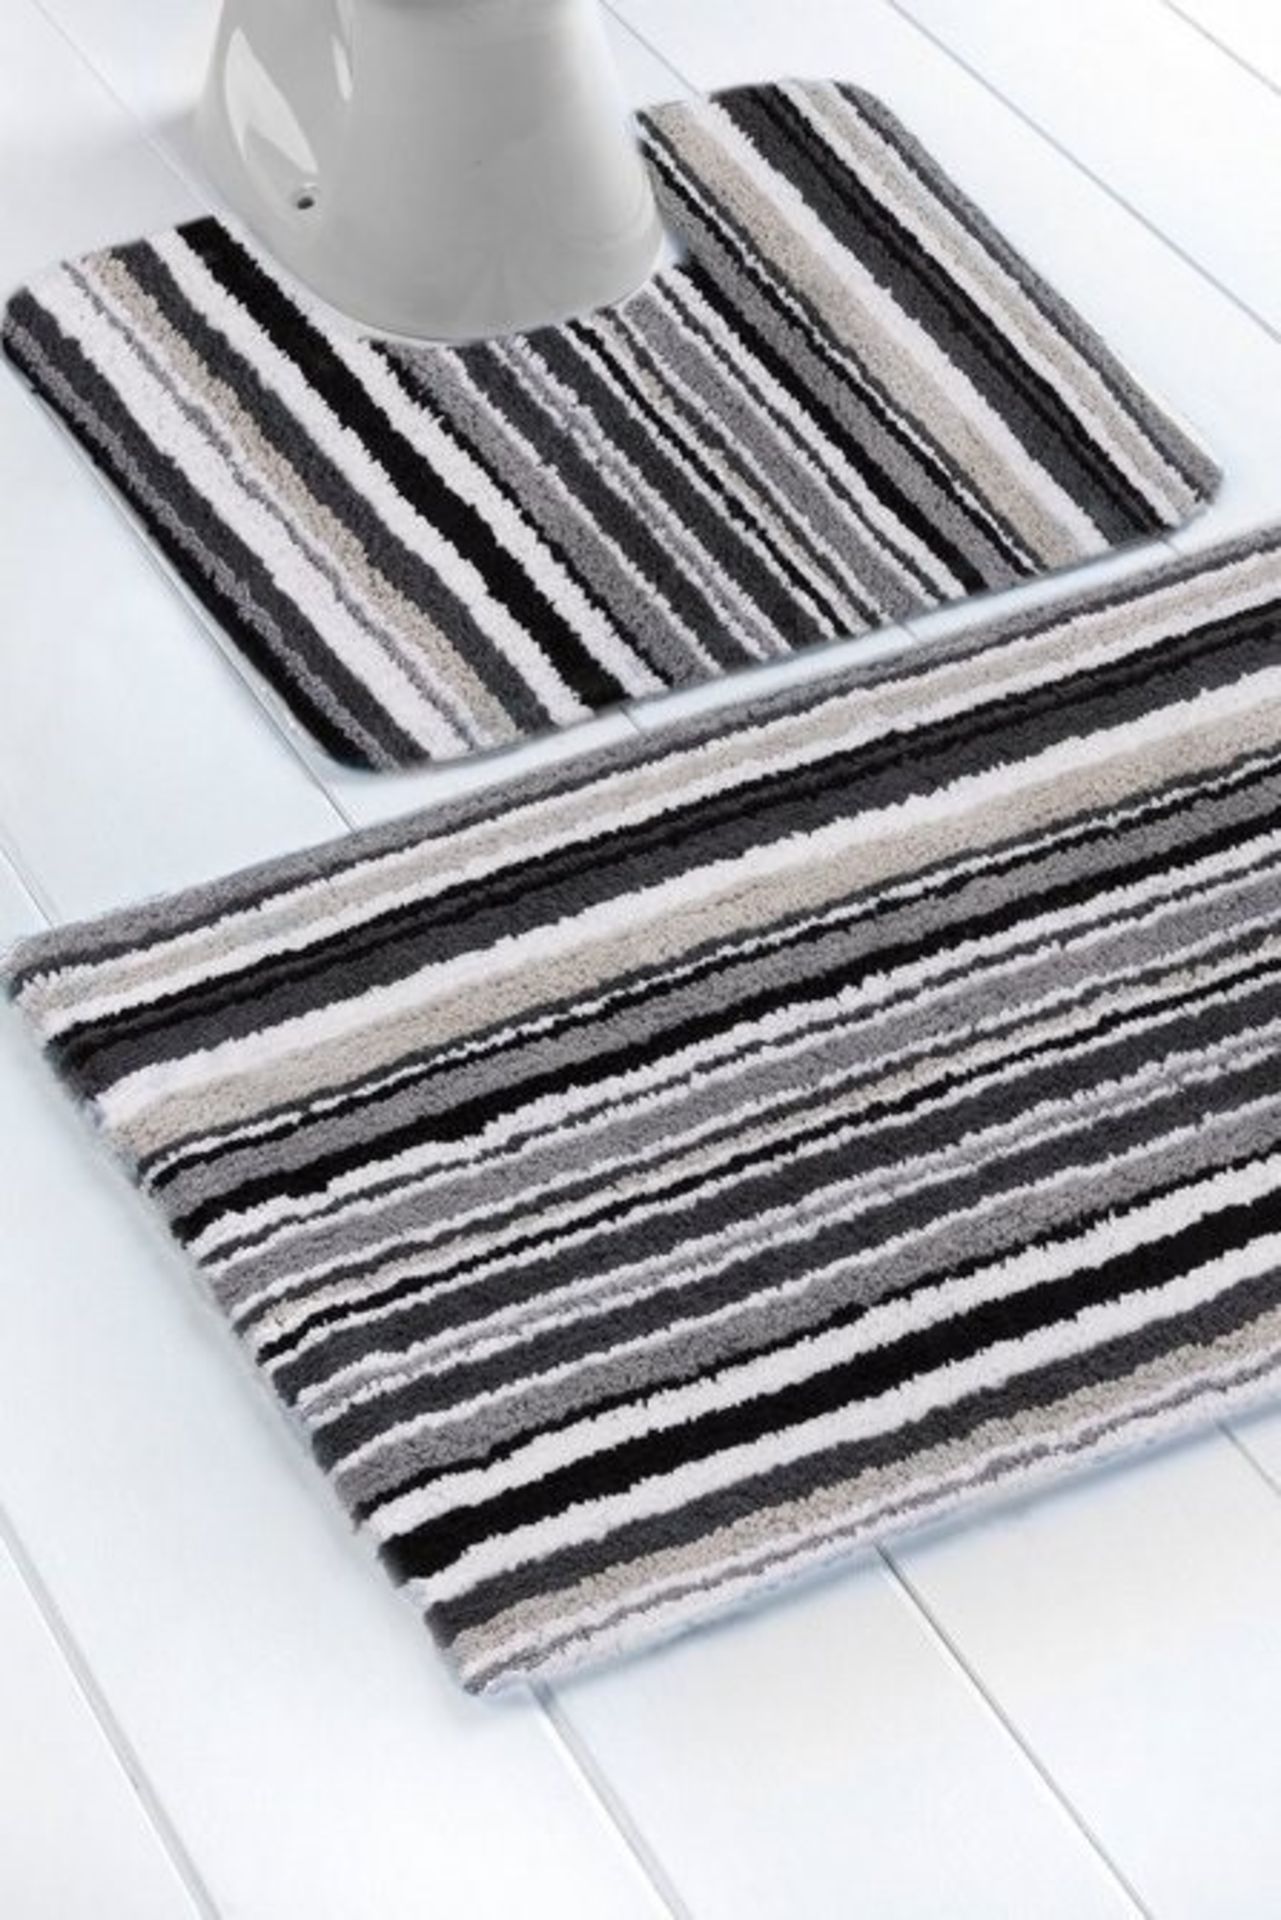 1 BAGGED LINEA STRIPE PEDESTAL MAT IN CHARCOAL / SIZE 50 X 50CM (PUBLIC VIEWING AVAILABLE)